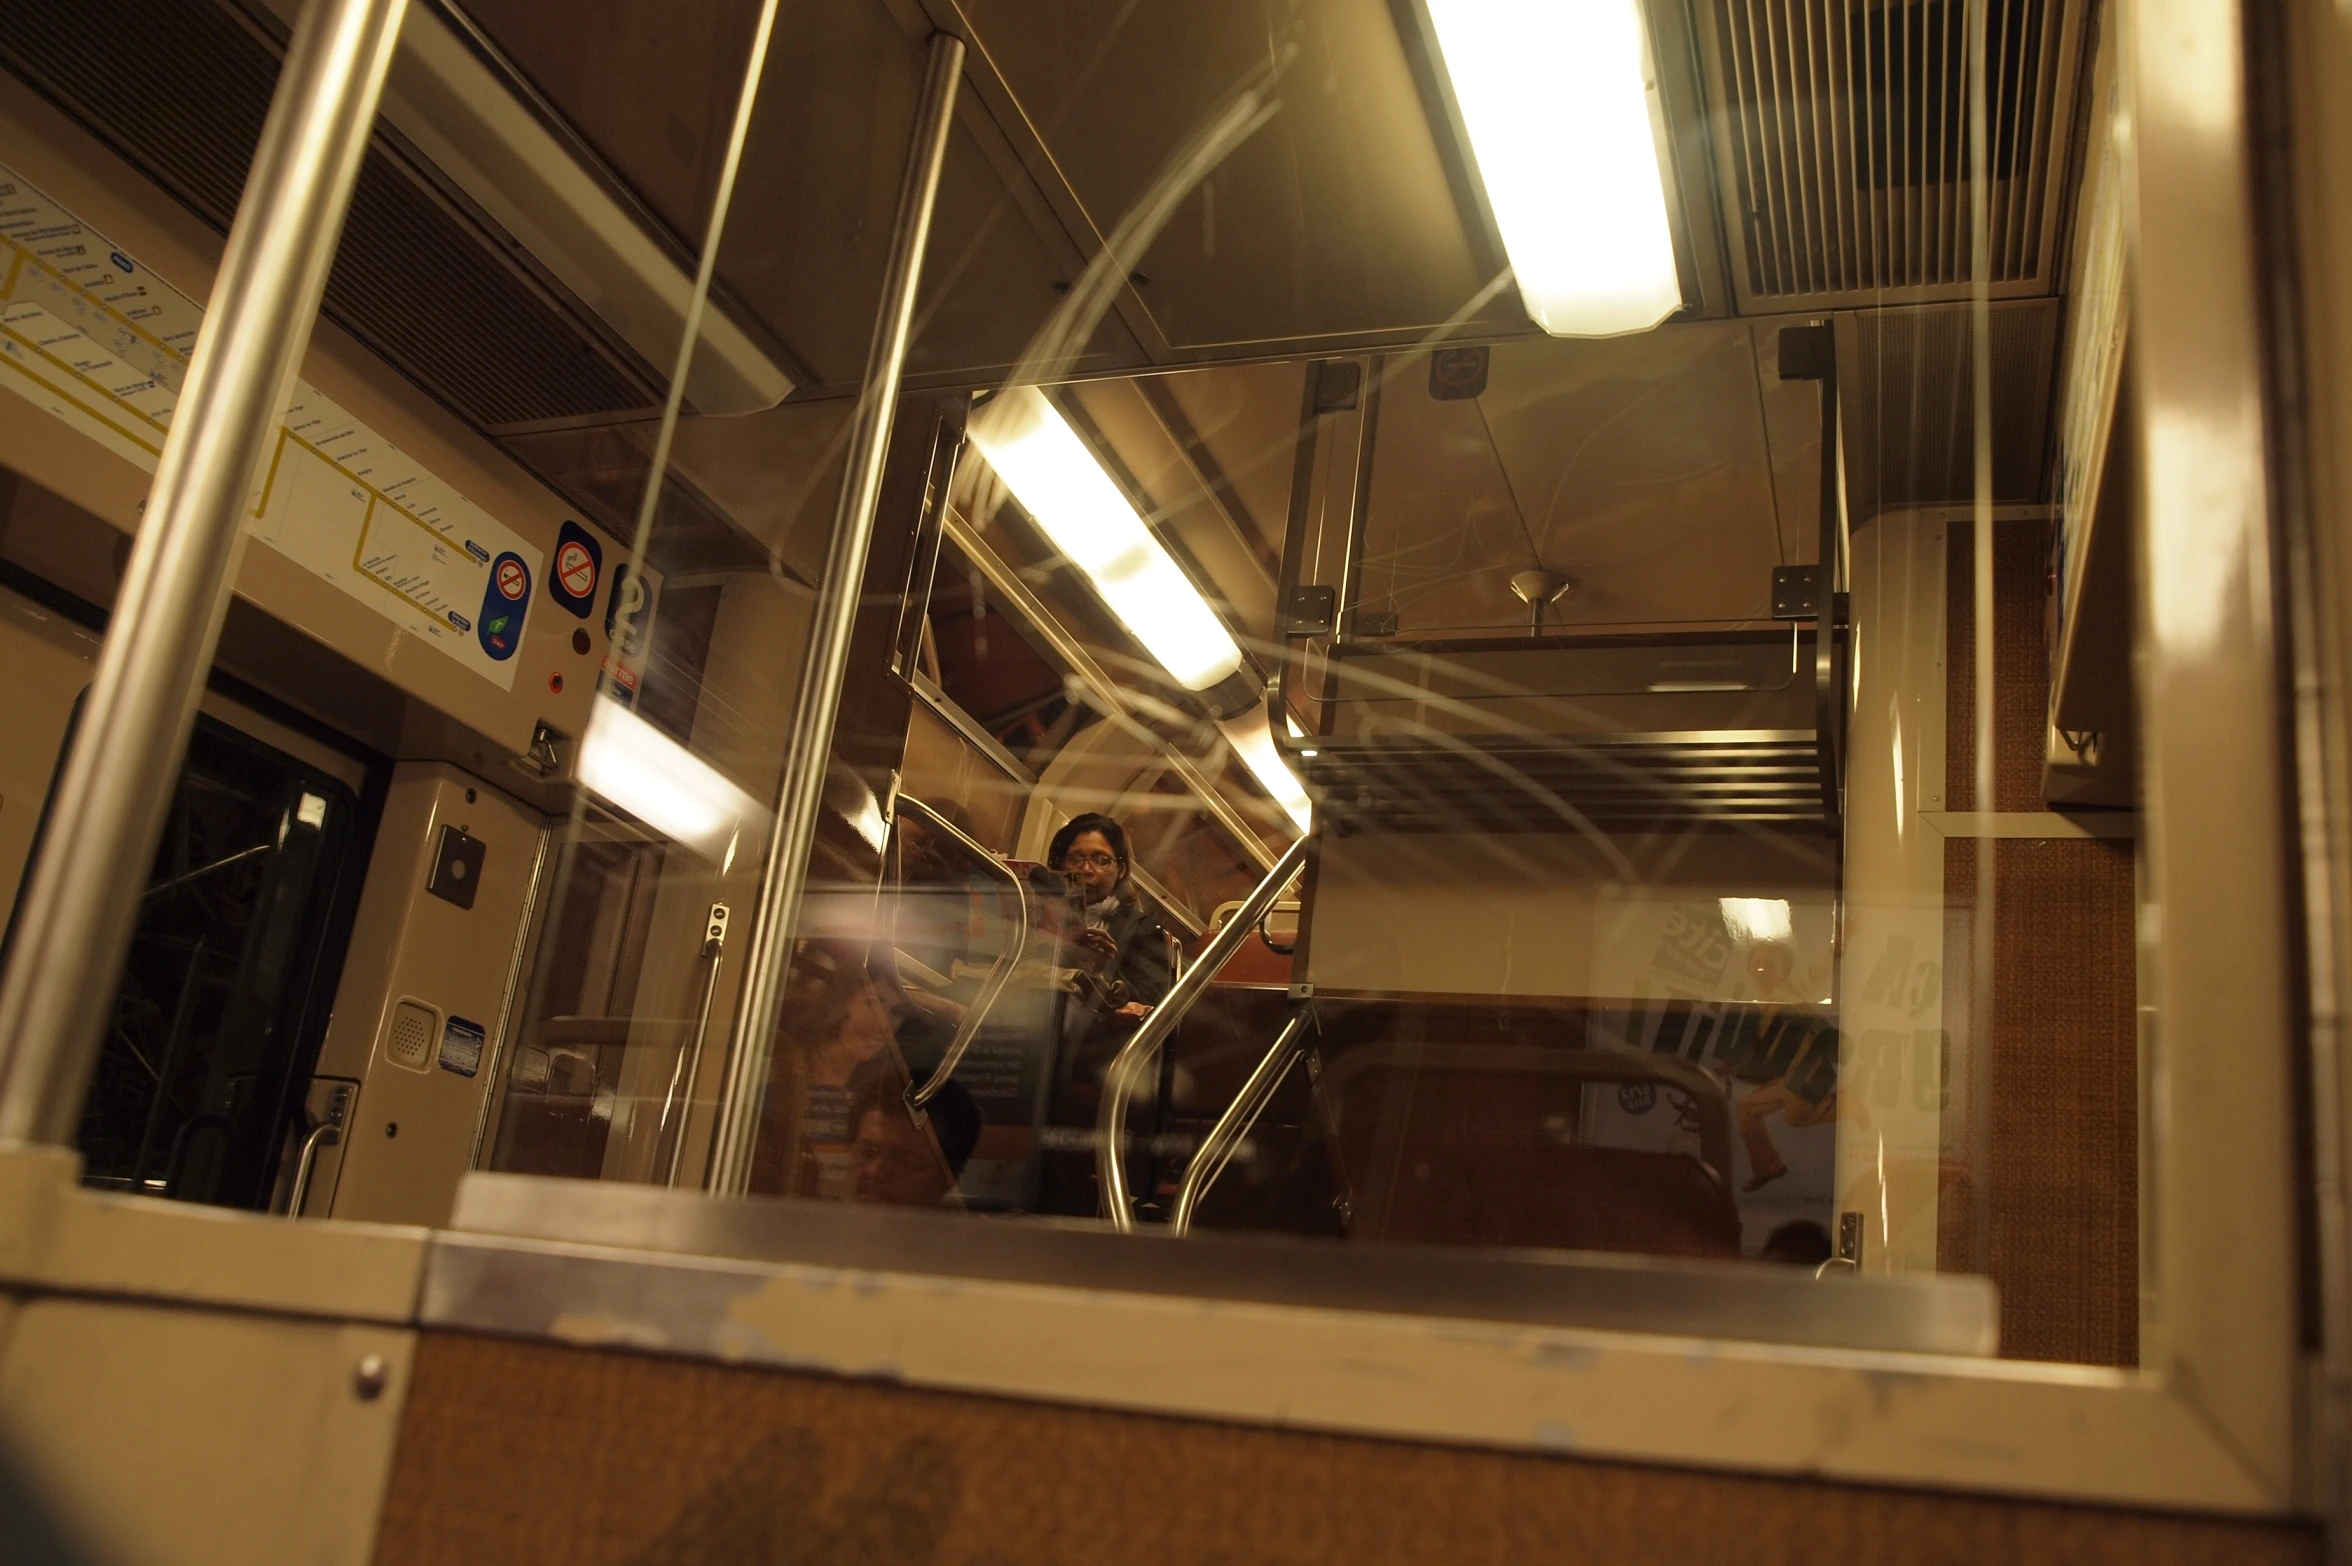 the reflection of a man walking down a train